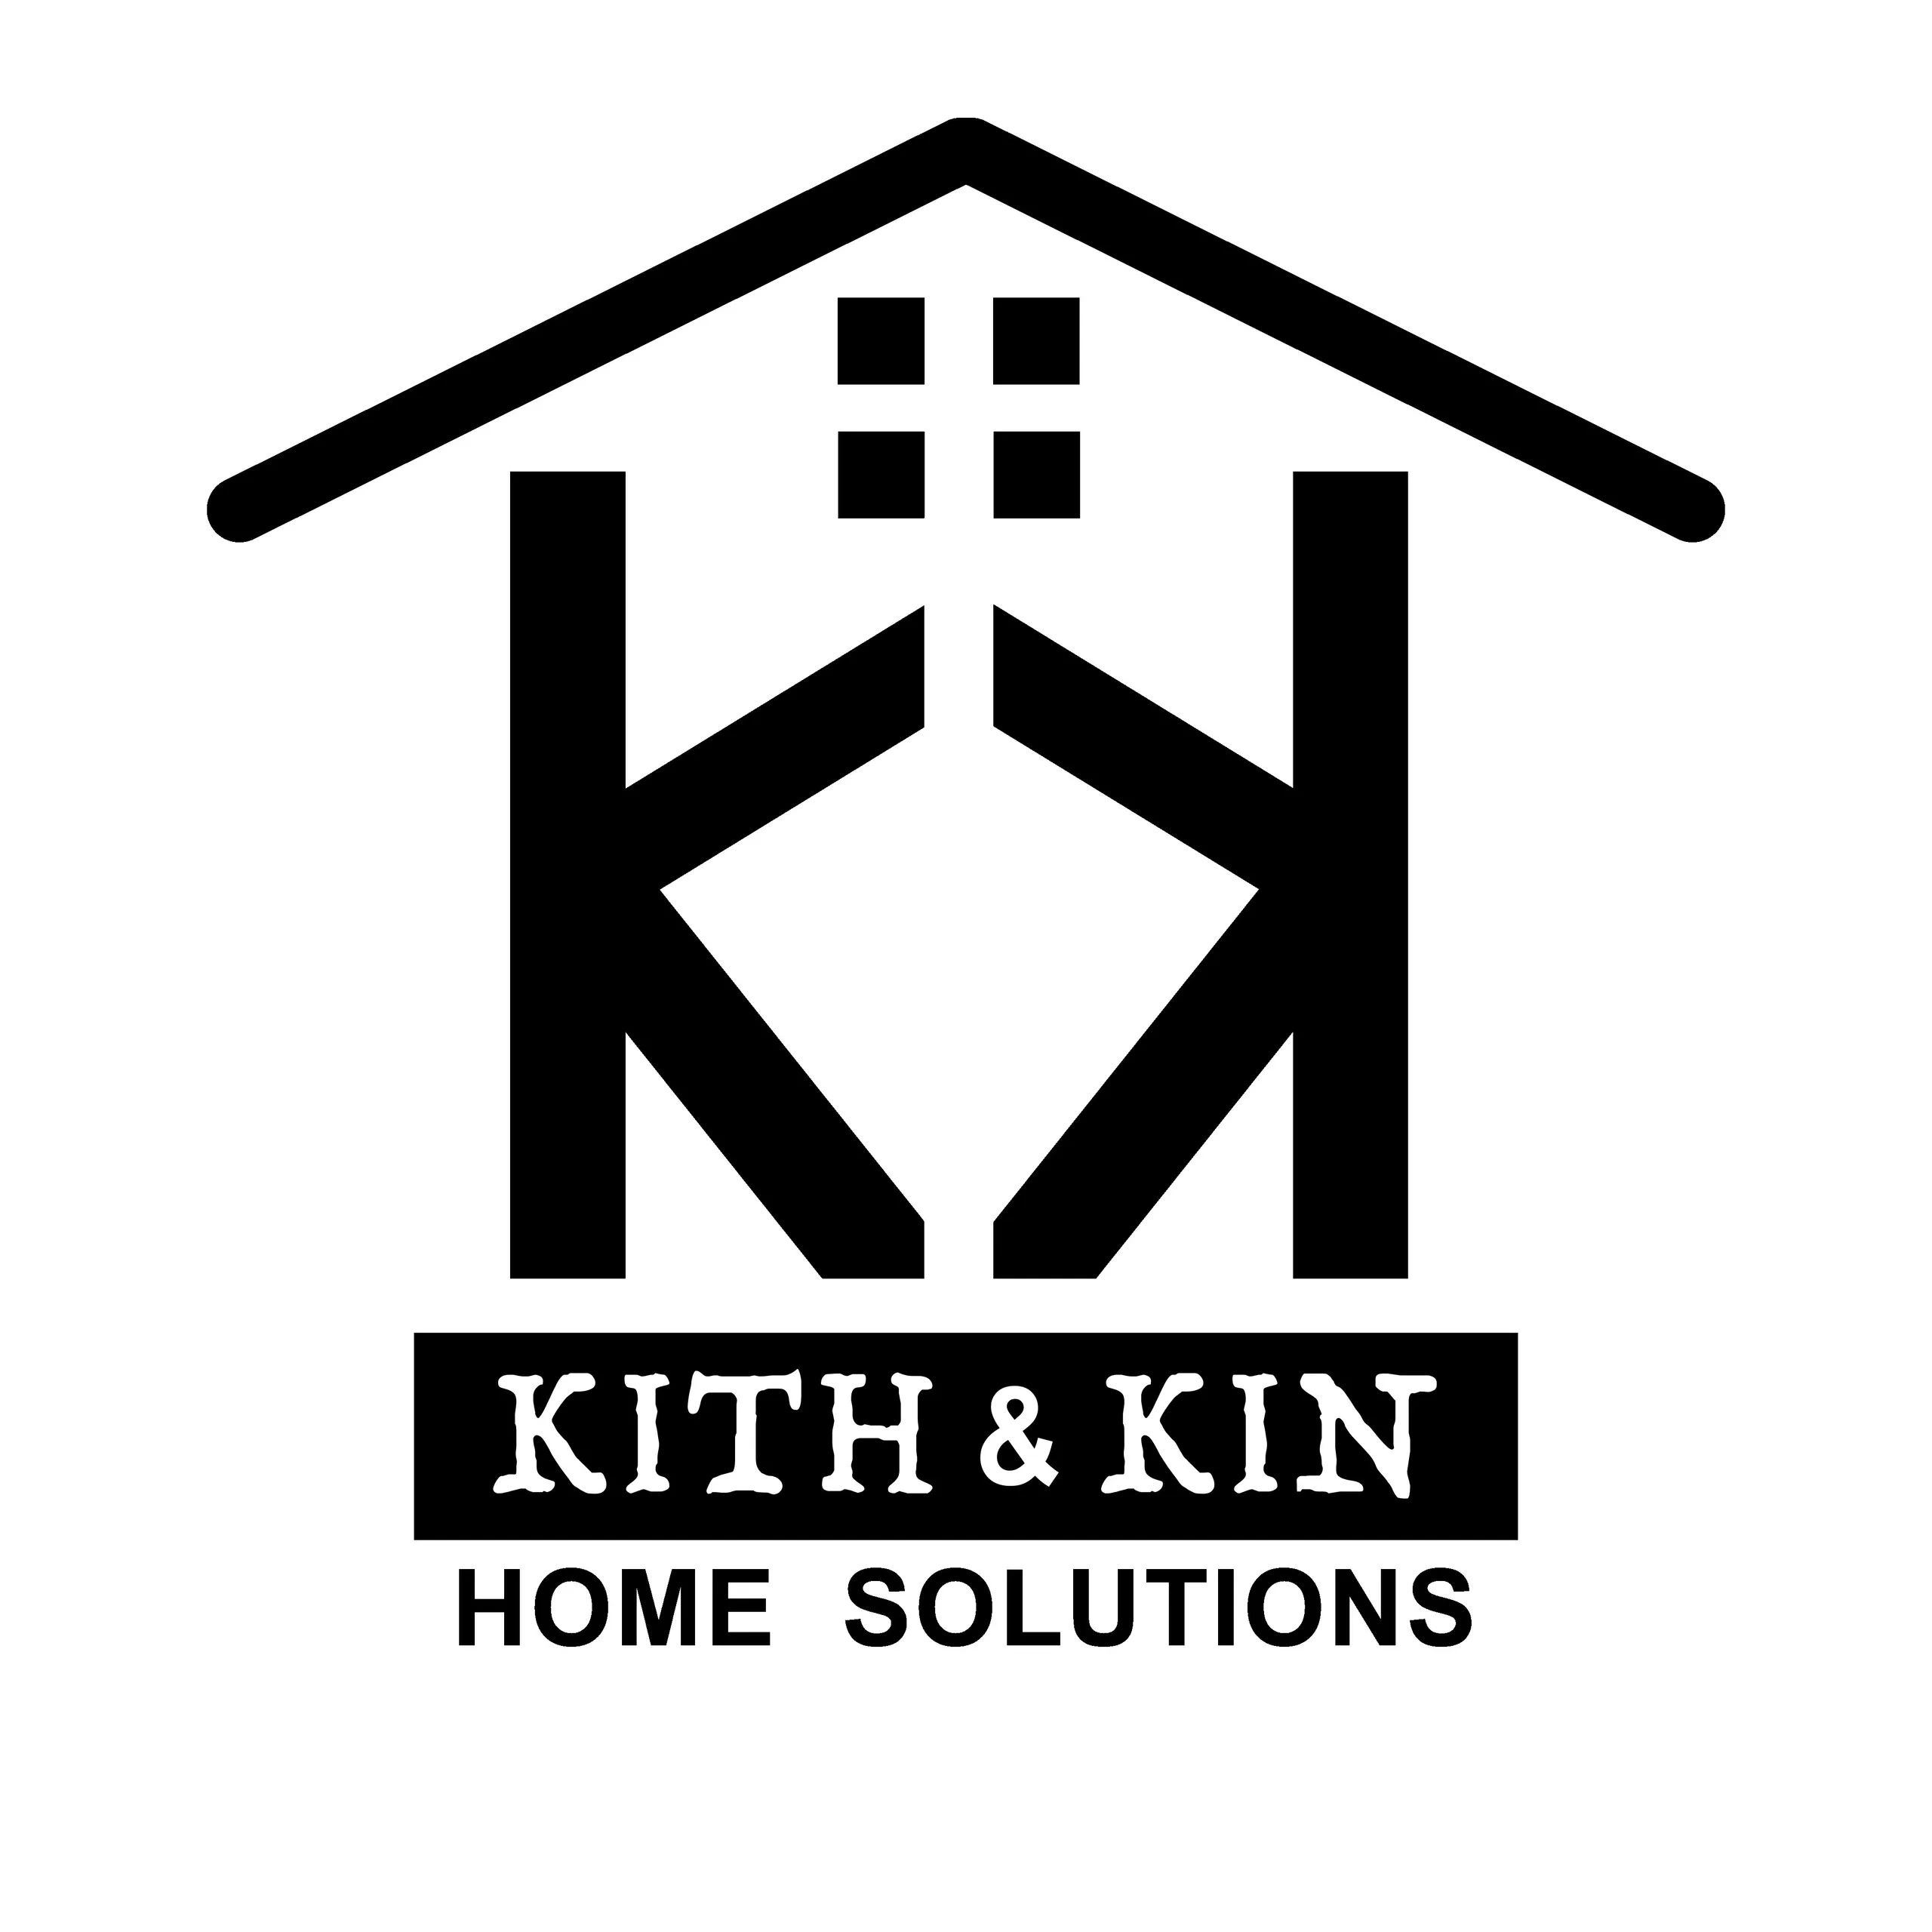 Welcome to Kith & Kin Home Solutions! Building trust – one home at a time.